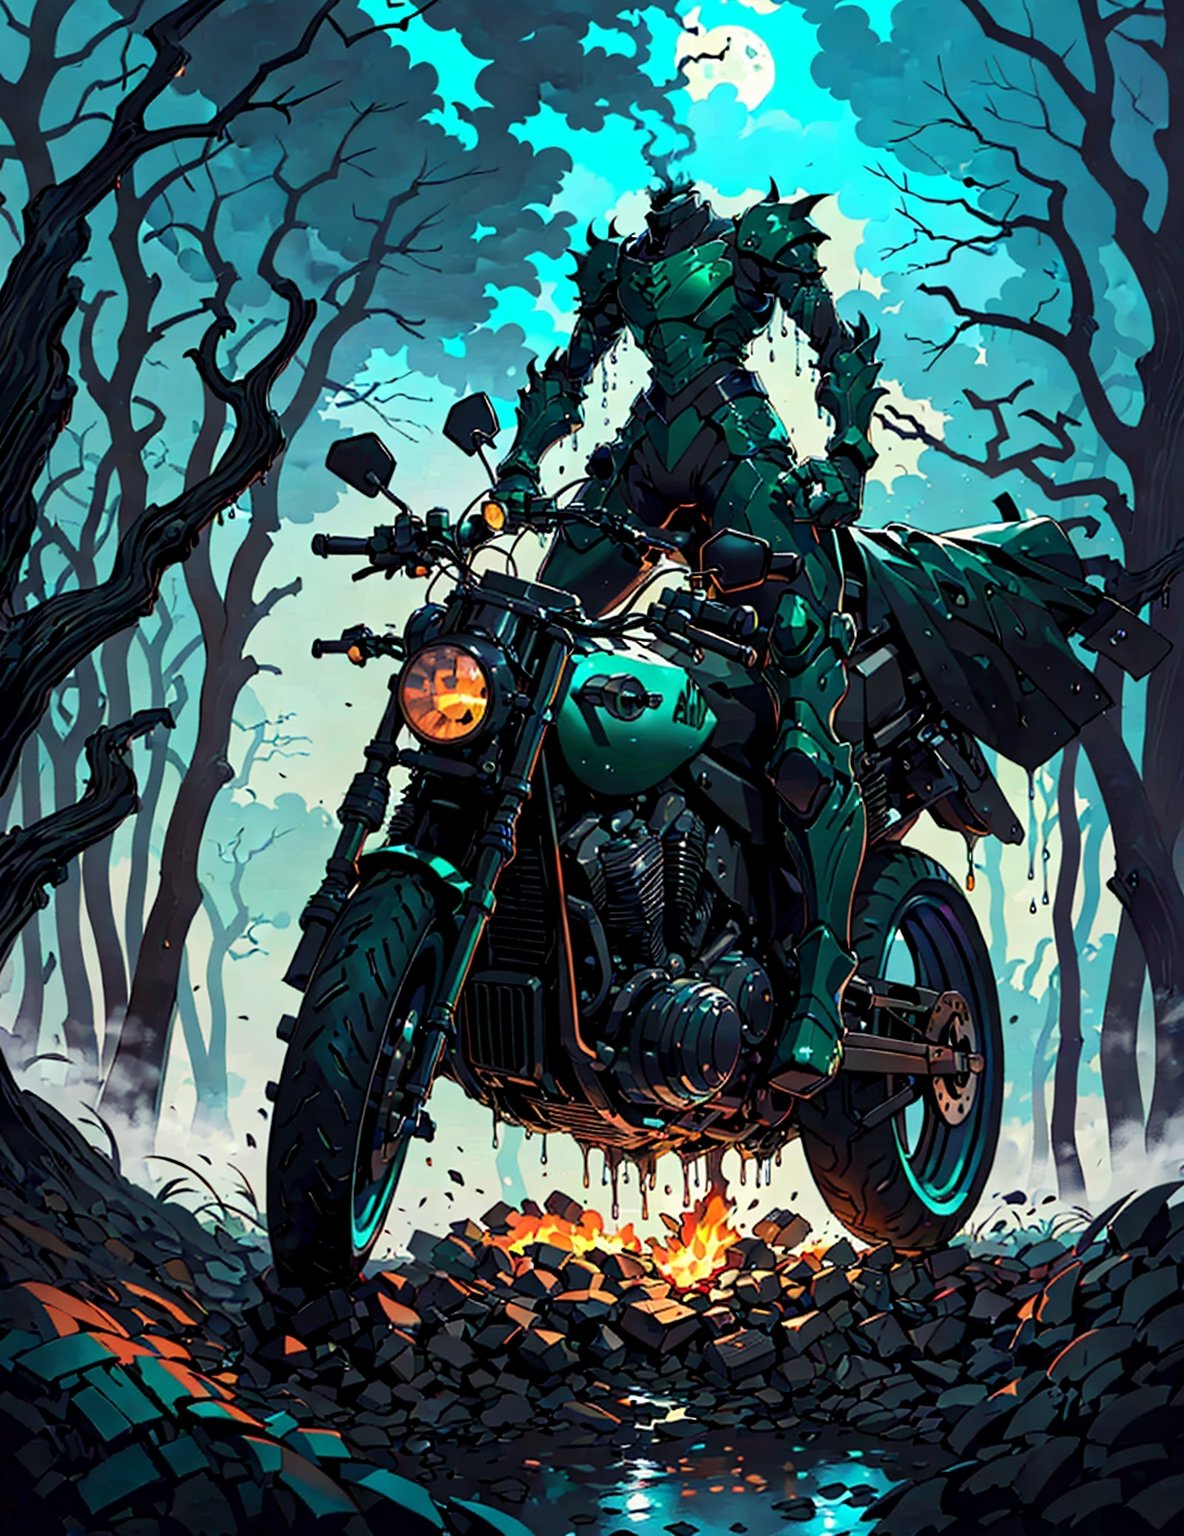 (((a headless horseman))) he rides a burning 1930 Harley Davidson motorcycle down a wooded highway on a dark night. (((No head)))(((decapitated)))(((headless)))(((no helmet)))(((empty neck hole)))(((The motorcycle has the an iron horse head welded to the front, it's eyes serve as headlights))),holding a machete

 (((Drippy, burnt ember asthetic))), ((gnarly spooky trees)), autumn leaves, (((green fog))), crescent moon, weird mushrooms, 

(((an iron horse head is welded on to the front of motorcycle, (rider has no head, he is decapitated, he is headless),))),halloweentech,art by Stephen Gammell,fire that looks like...,HellAI,horror